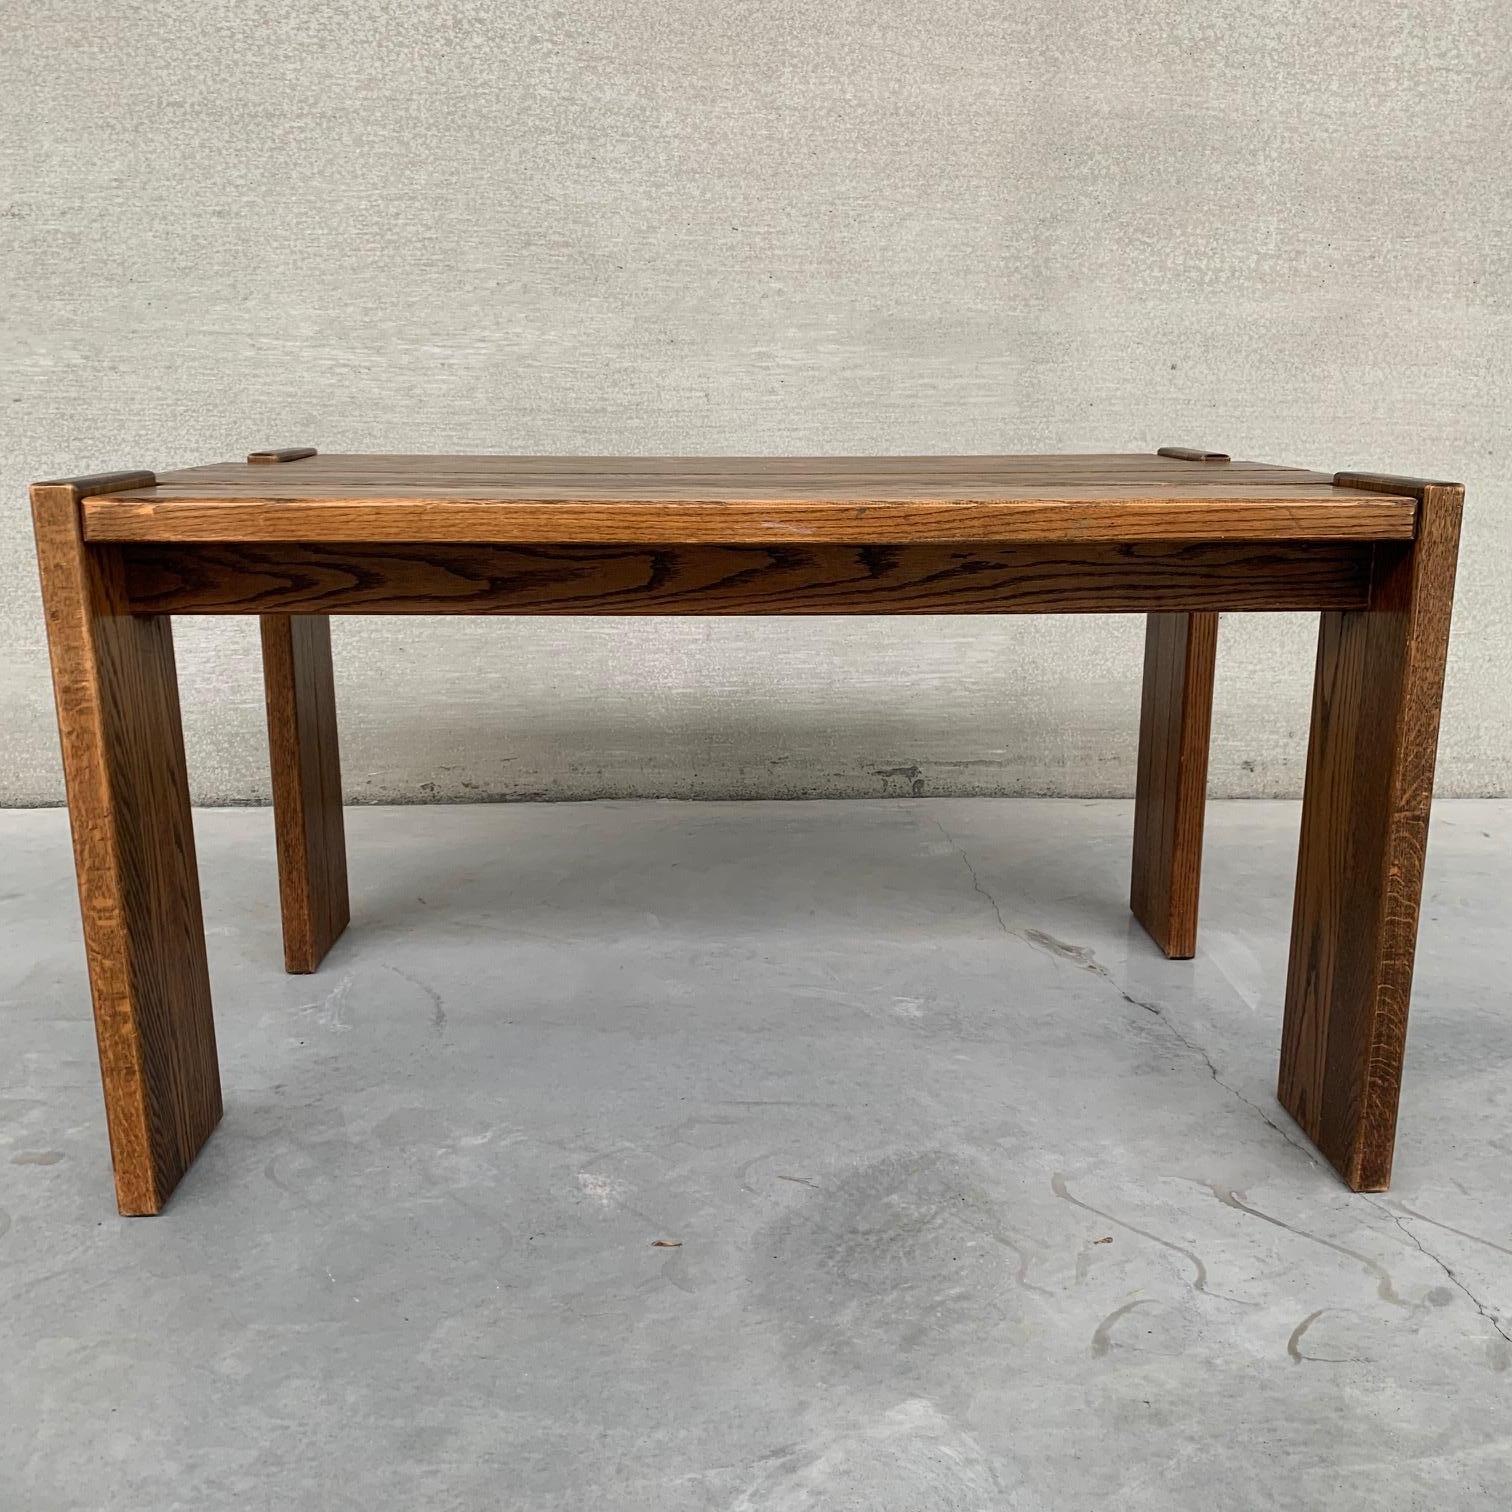 An oak brutalist style dining table. 

Belgium, c1970s. 

Good condition, some aging to the top. 

Location: Belgium Location

Dimensions: 90 D x 140 W x 74.5 total height x 72.5 table height in cm. 

Delivery: POA, We can ship around the